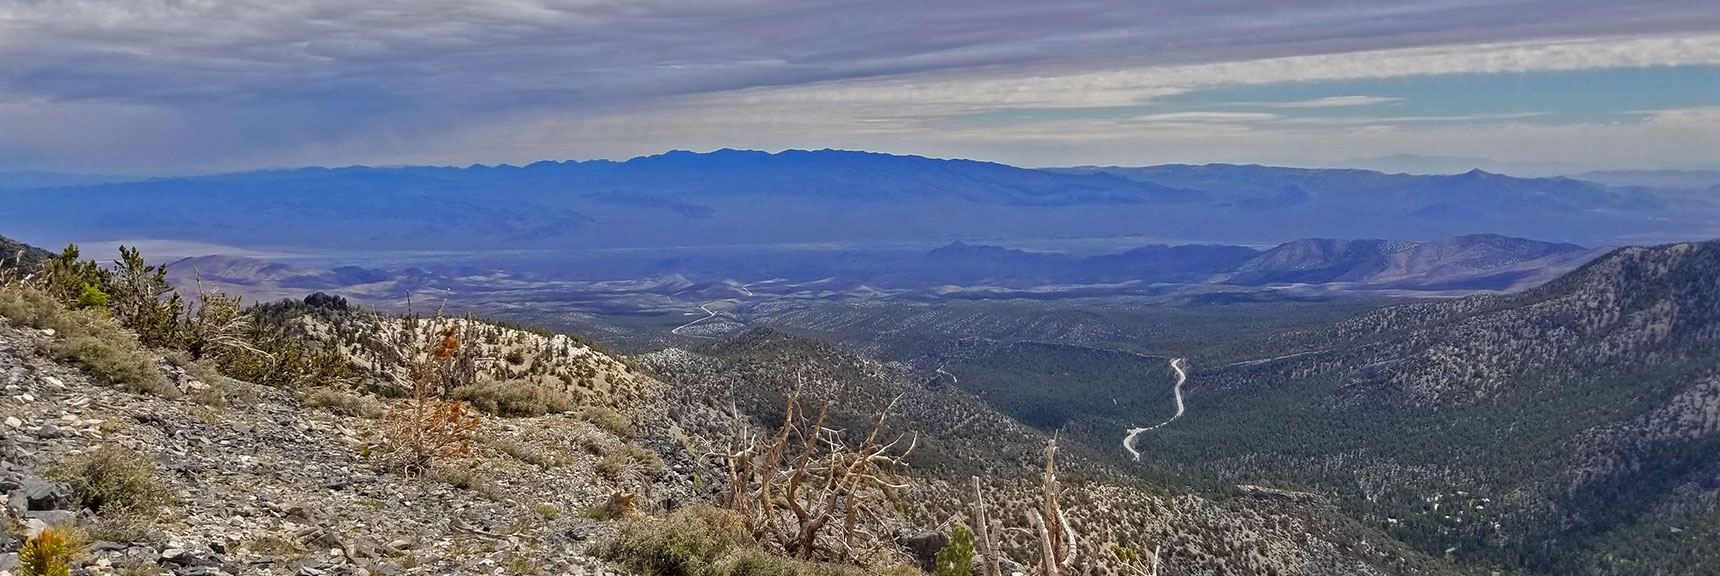 360-Degree Clockwise Circle View from the Eastern Summit Begins with Lee Canyon Rd, the Sheep Range and Gass Peak. | The Sisters South | Lee Canyon | Mt Charleston Wilderness | Spring Mountains, Nevada